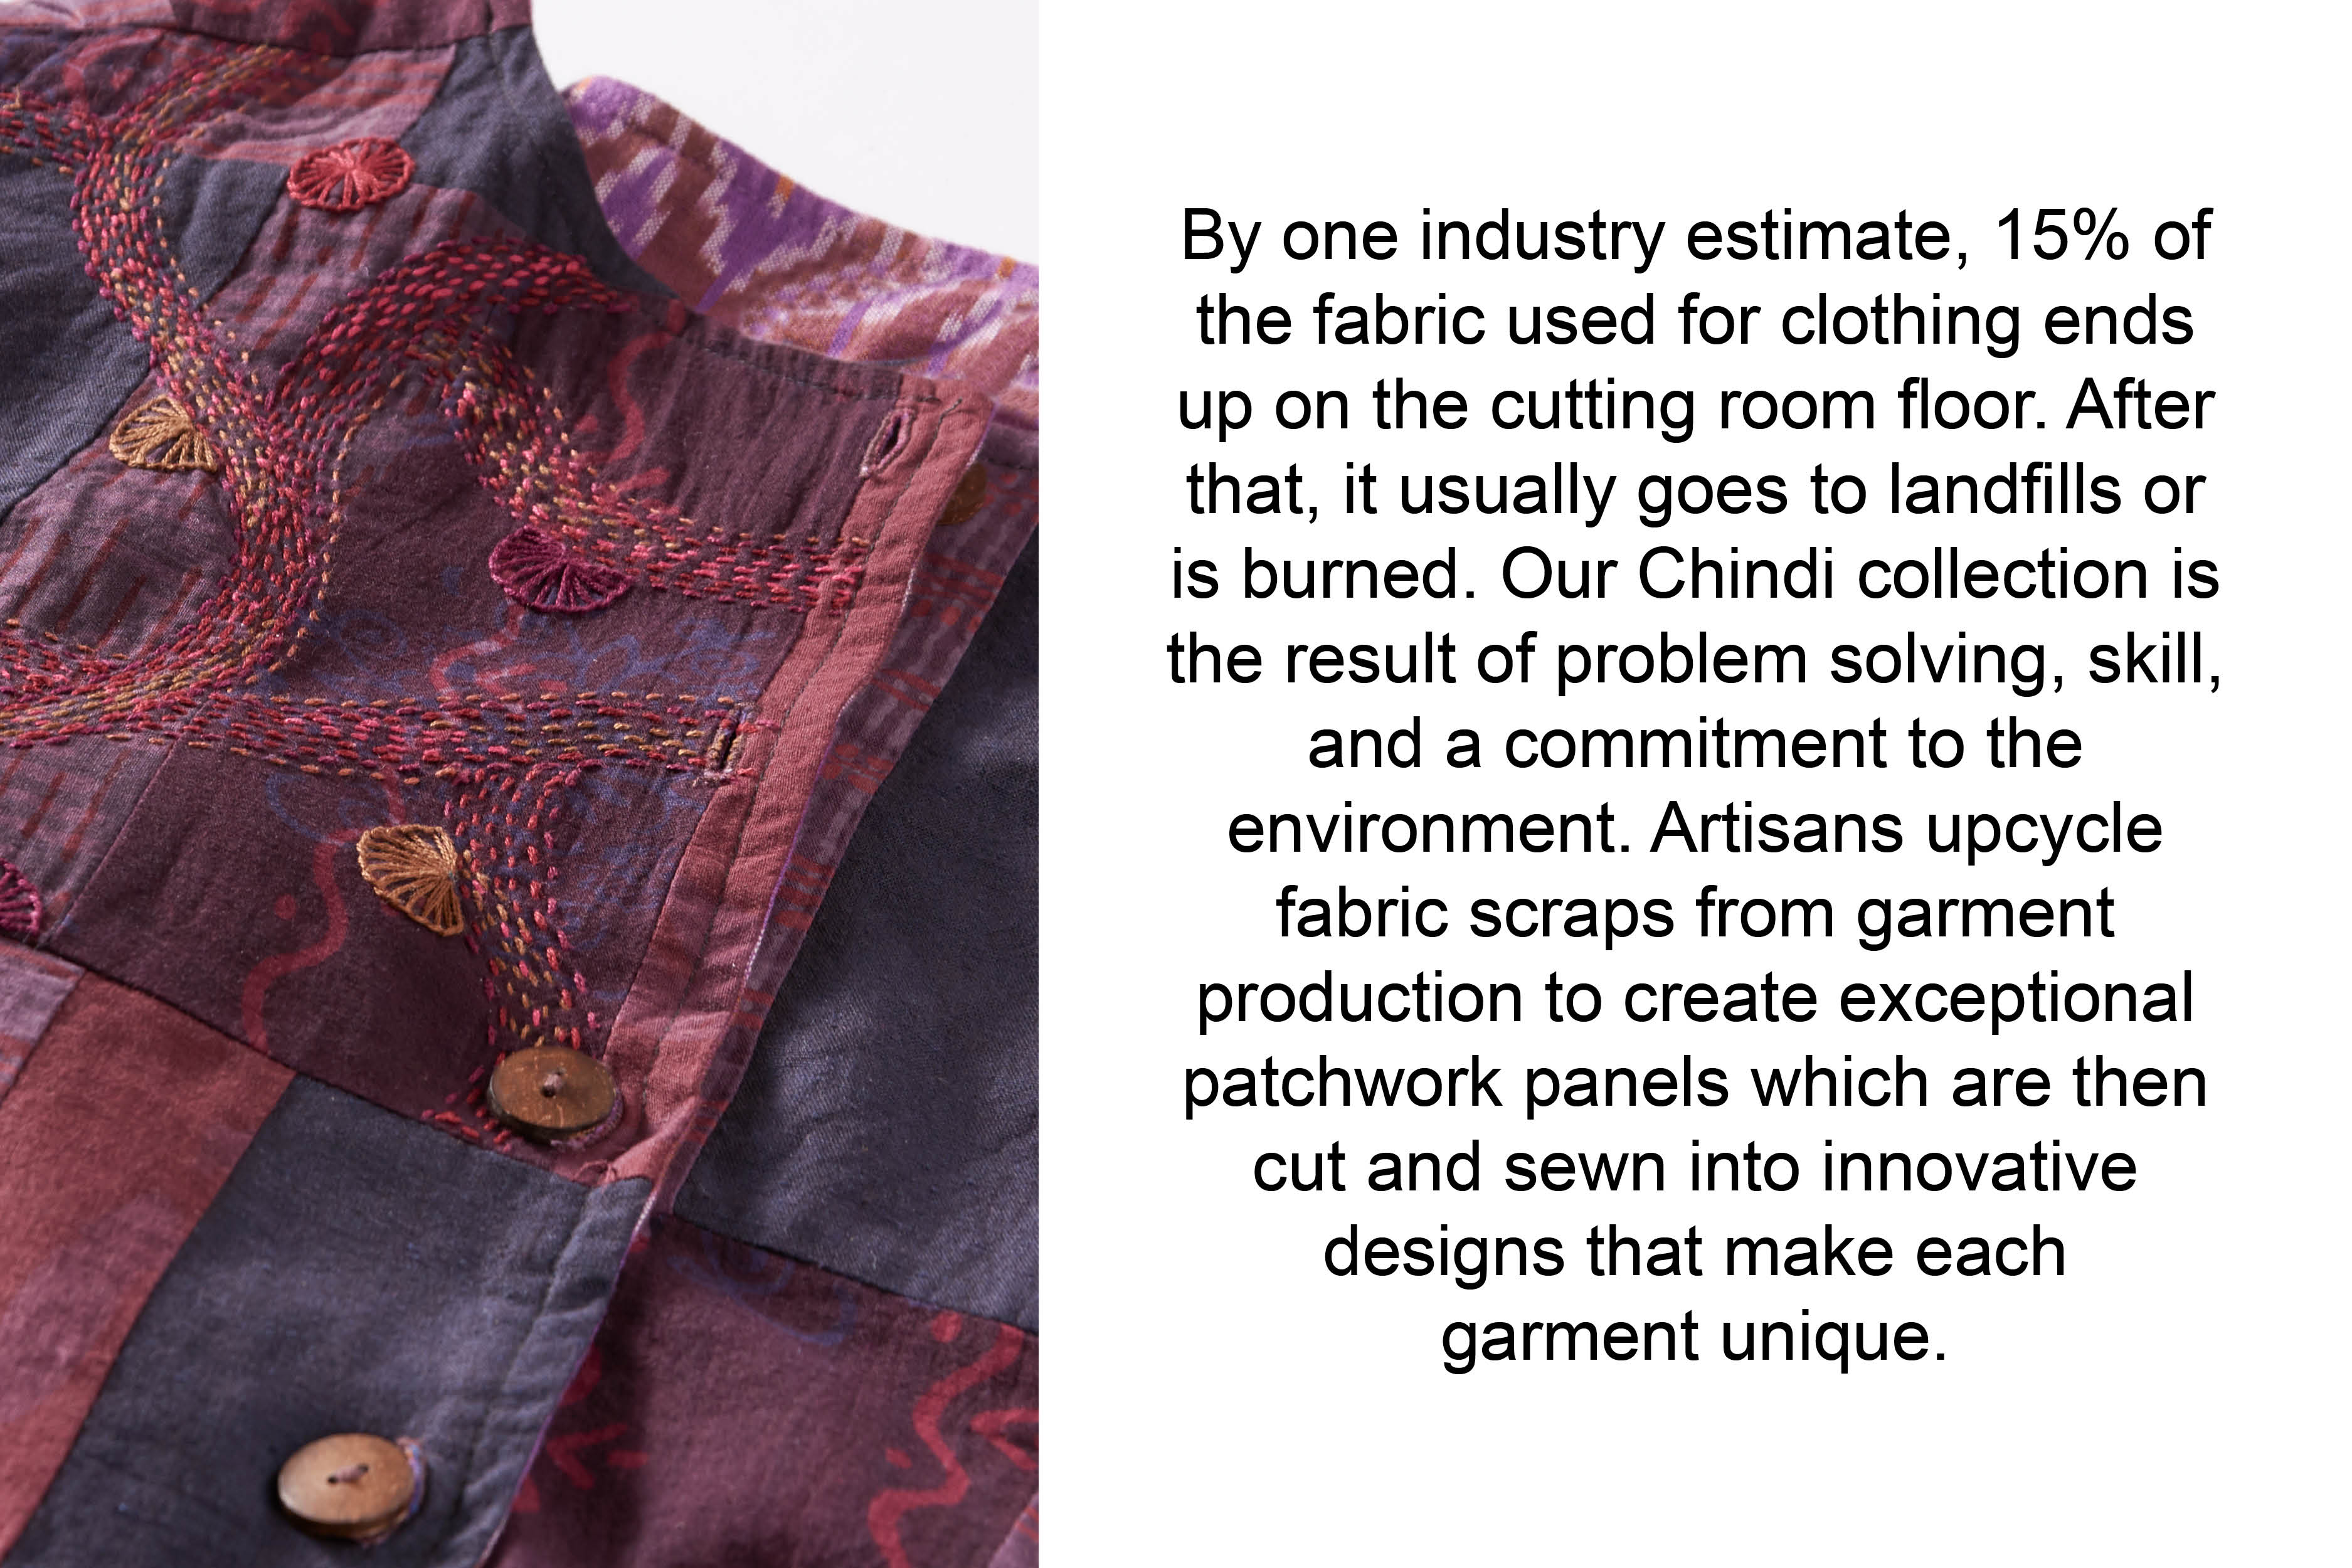 By one industry estimate, 15% of the fabric used for clothing ends up on the cutting room floor. After that, it usually goes to landfills or is burned. Our Chindi collection is the result of problem solving, skill, and a commitment to the environment. Artisans upcycle fabric
scraps from garment production to create exceptional patchwork panels which are then cut and sewn into innovative designs that make each garment unique.